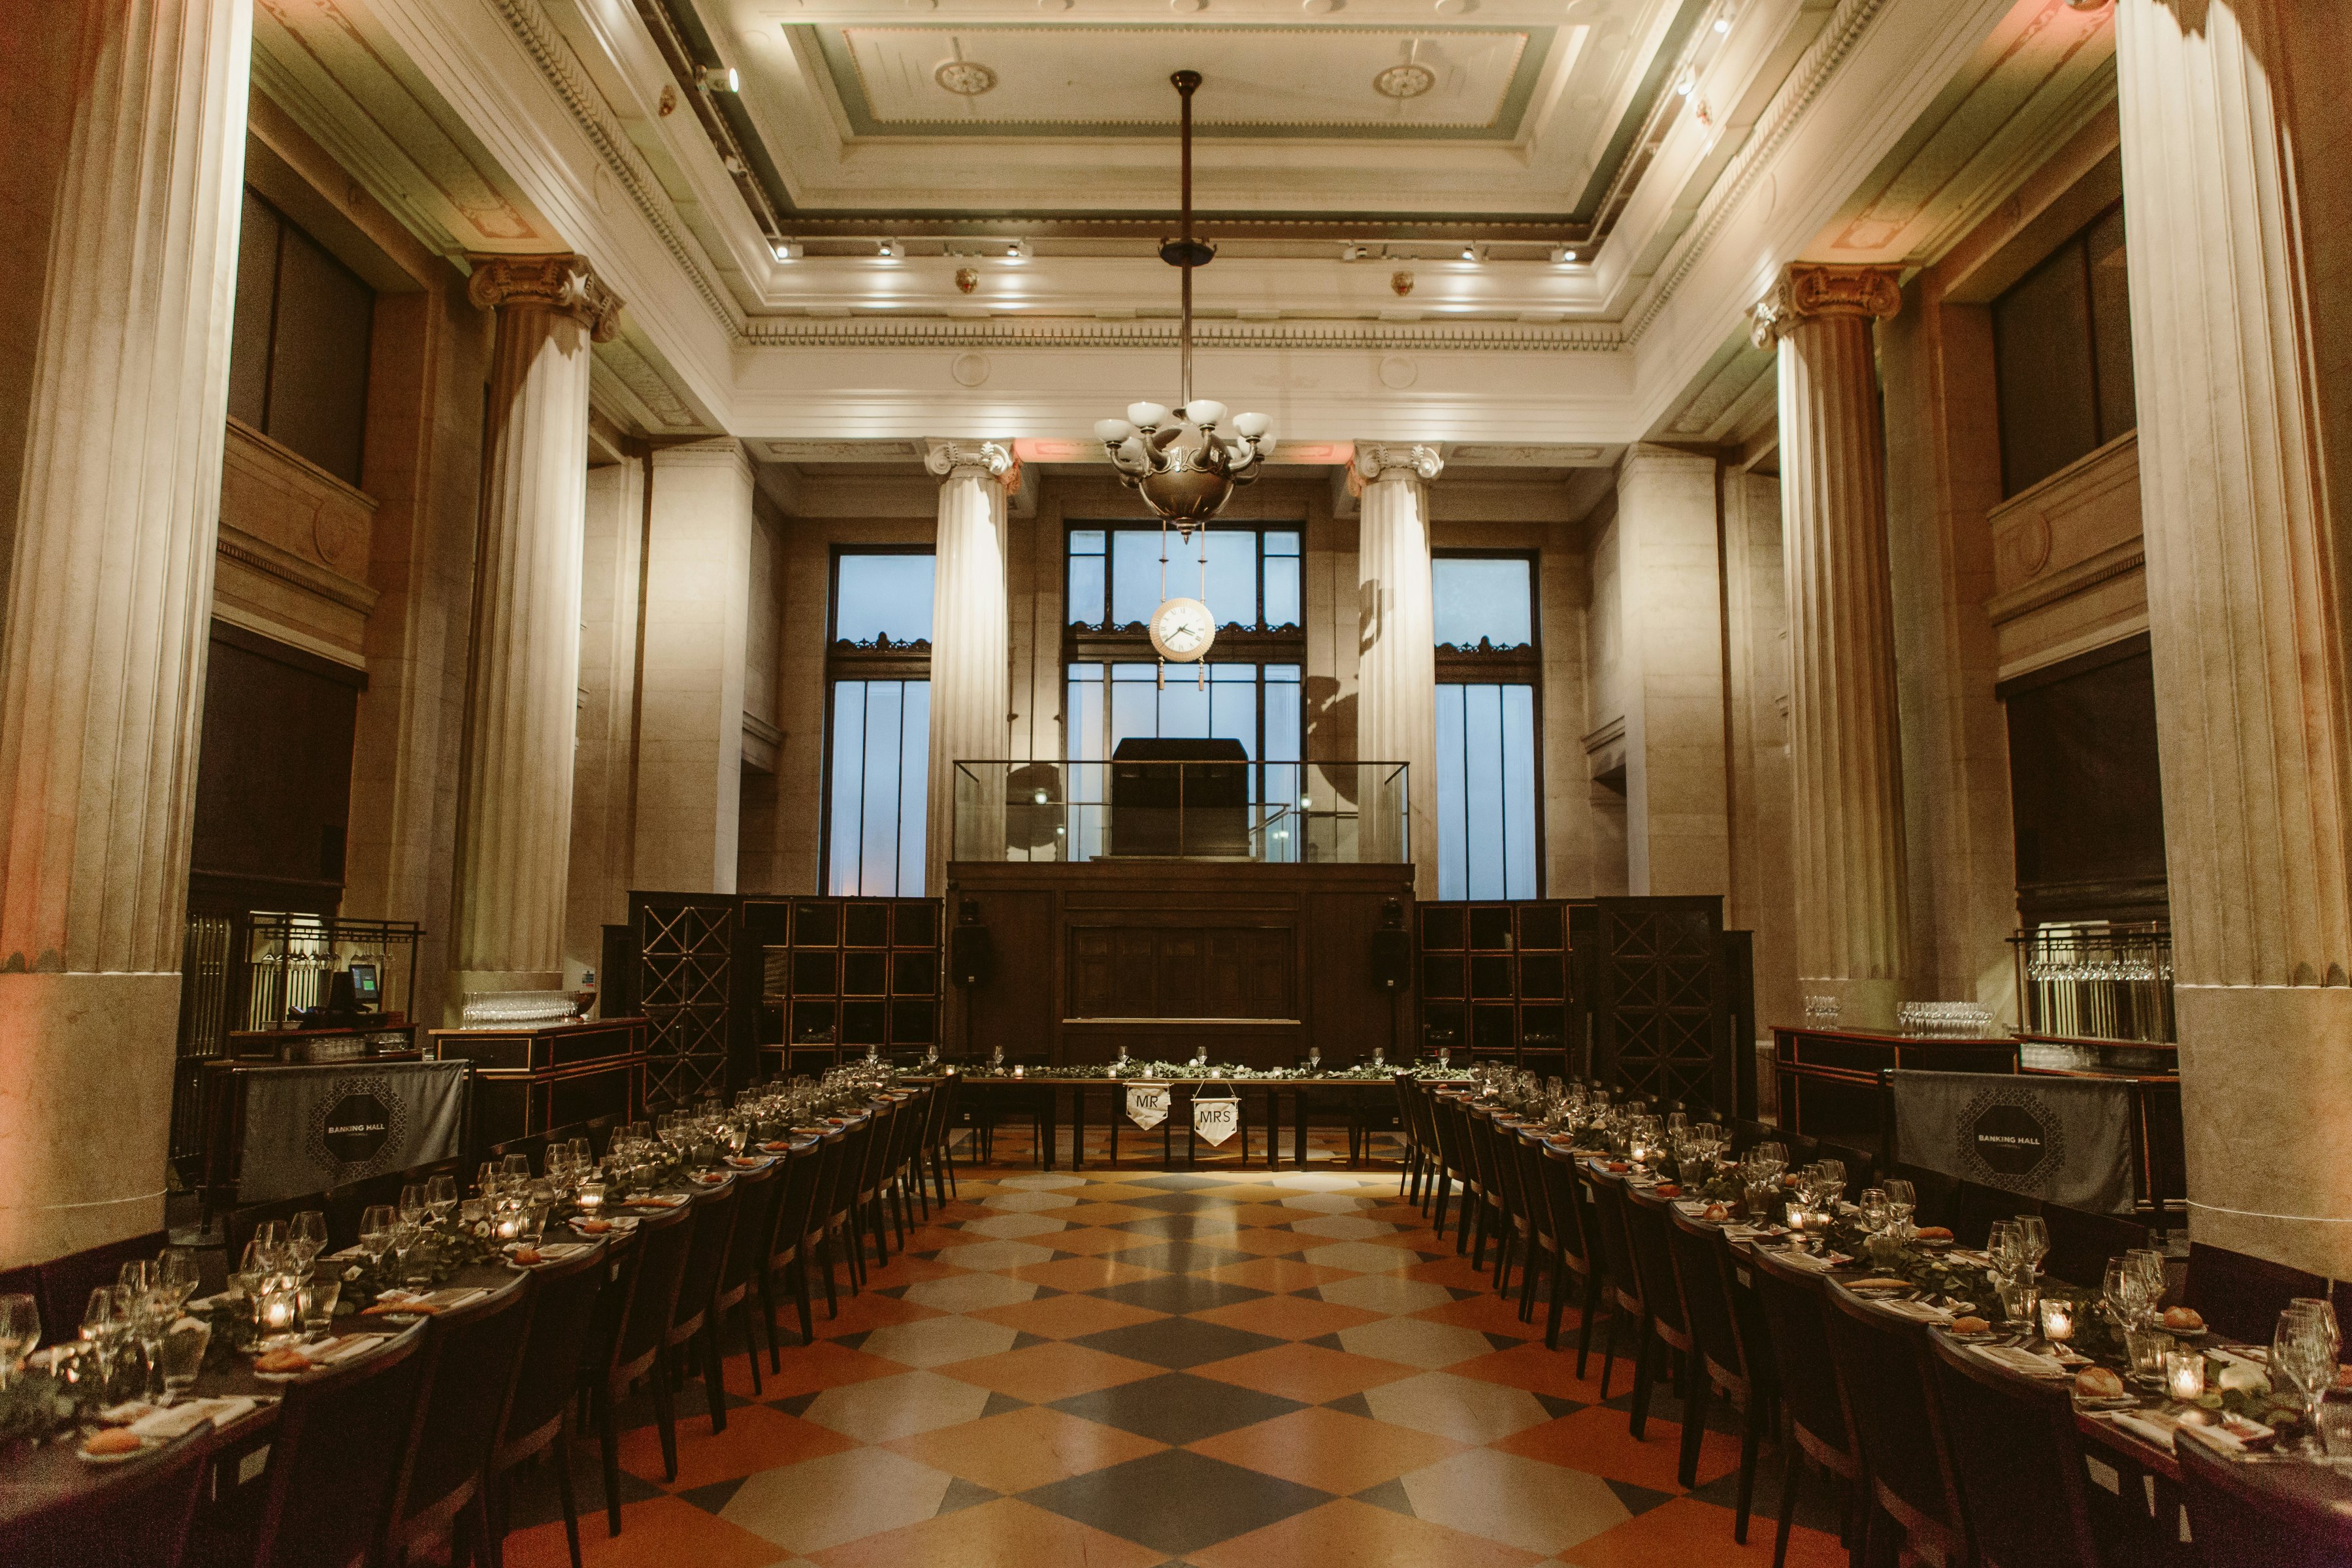 Weddings Halls Venues in London - The Banking Hall